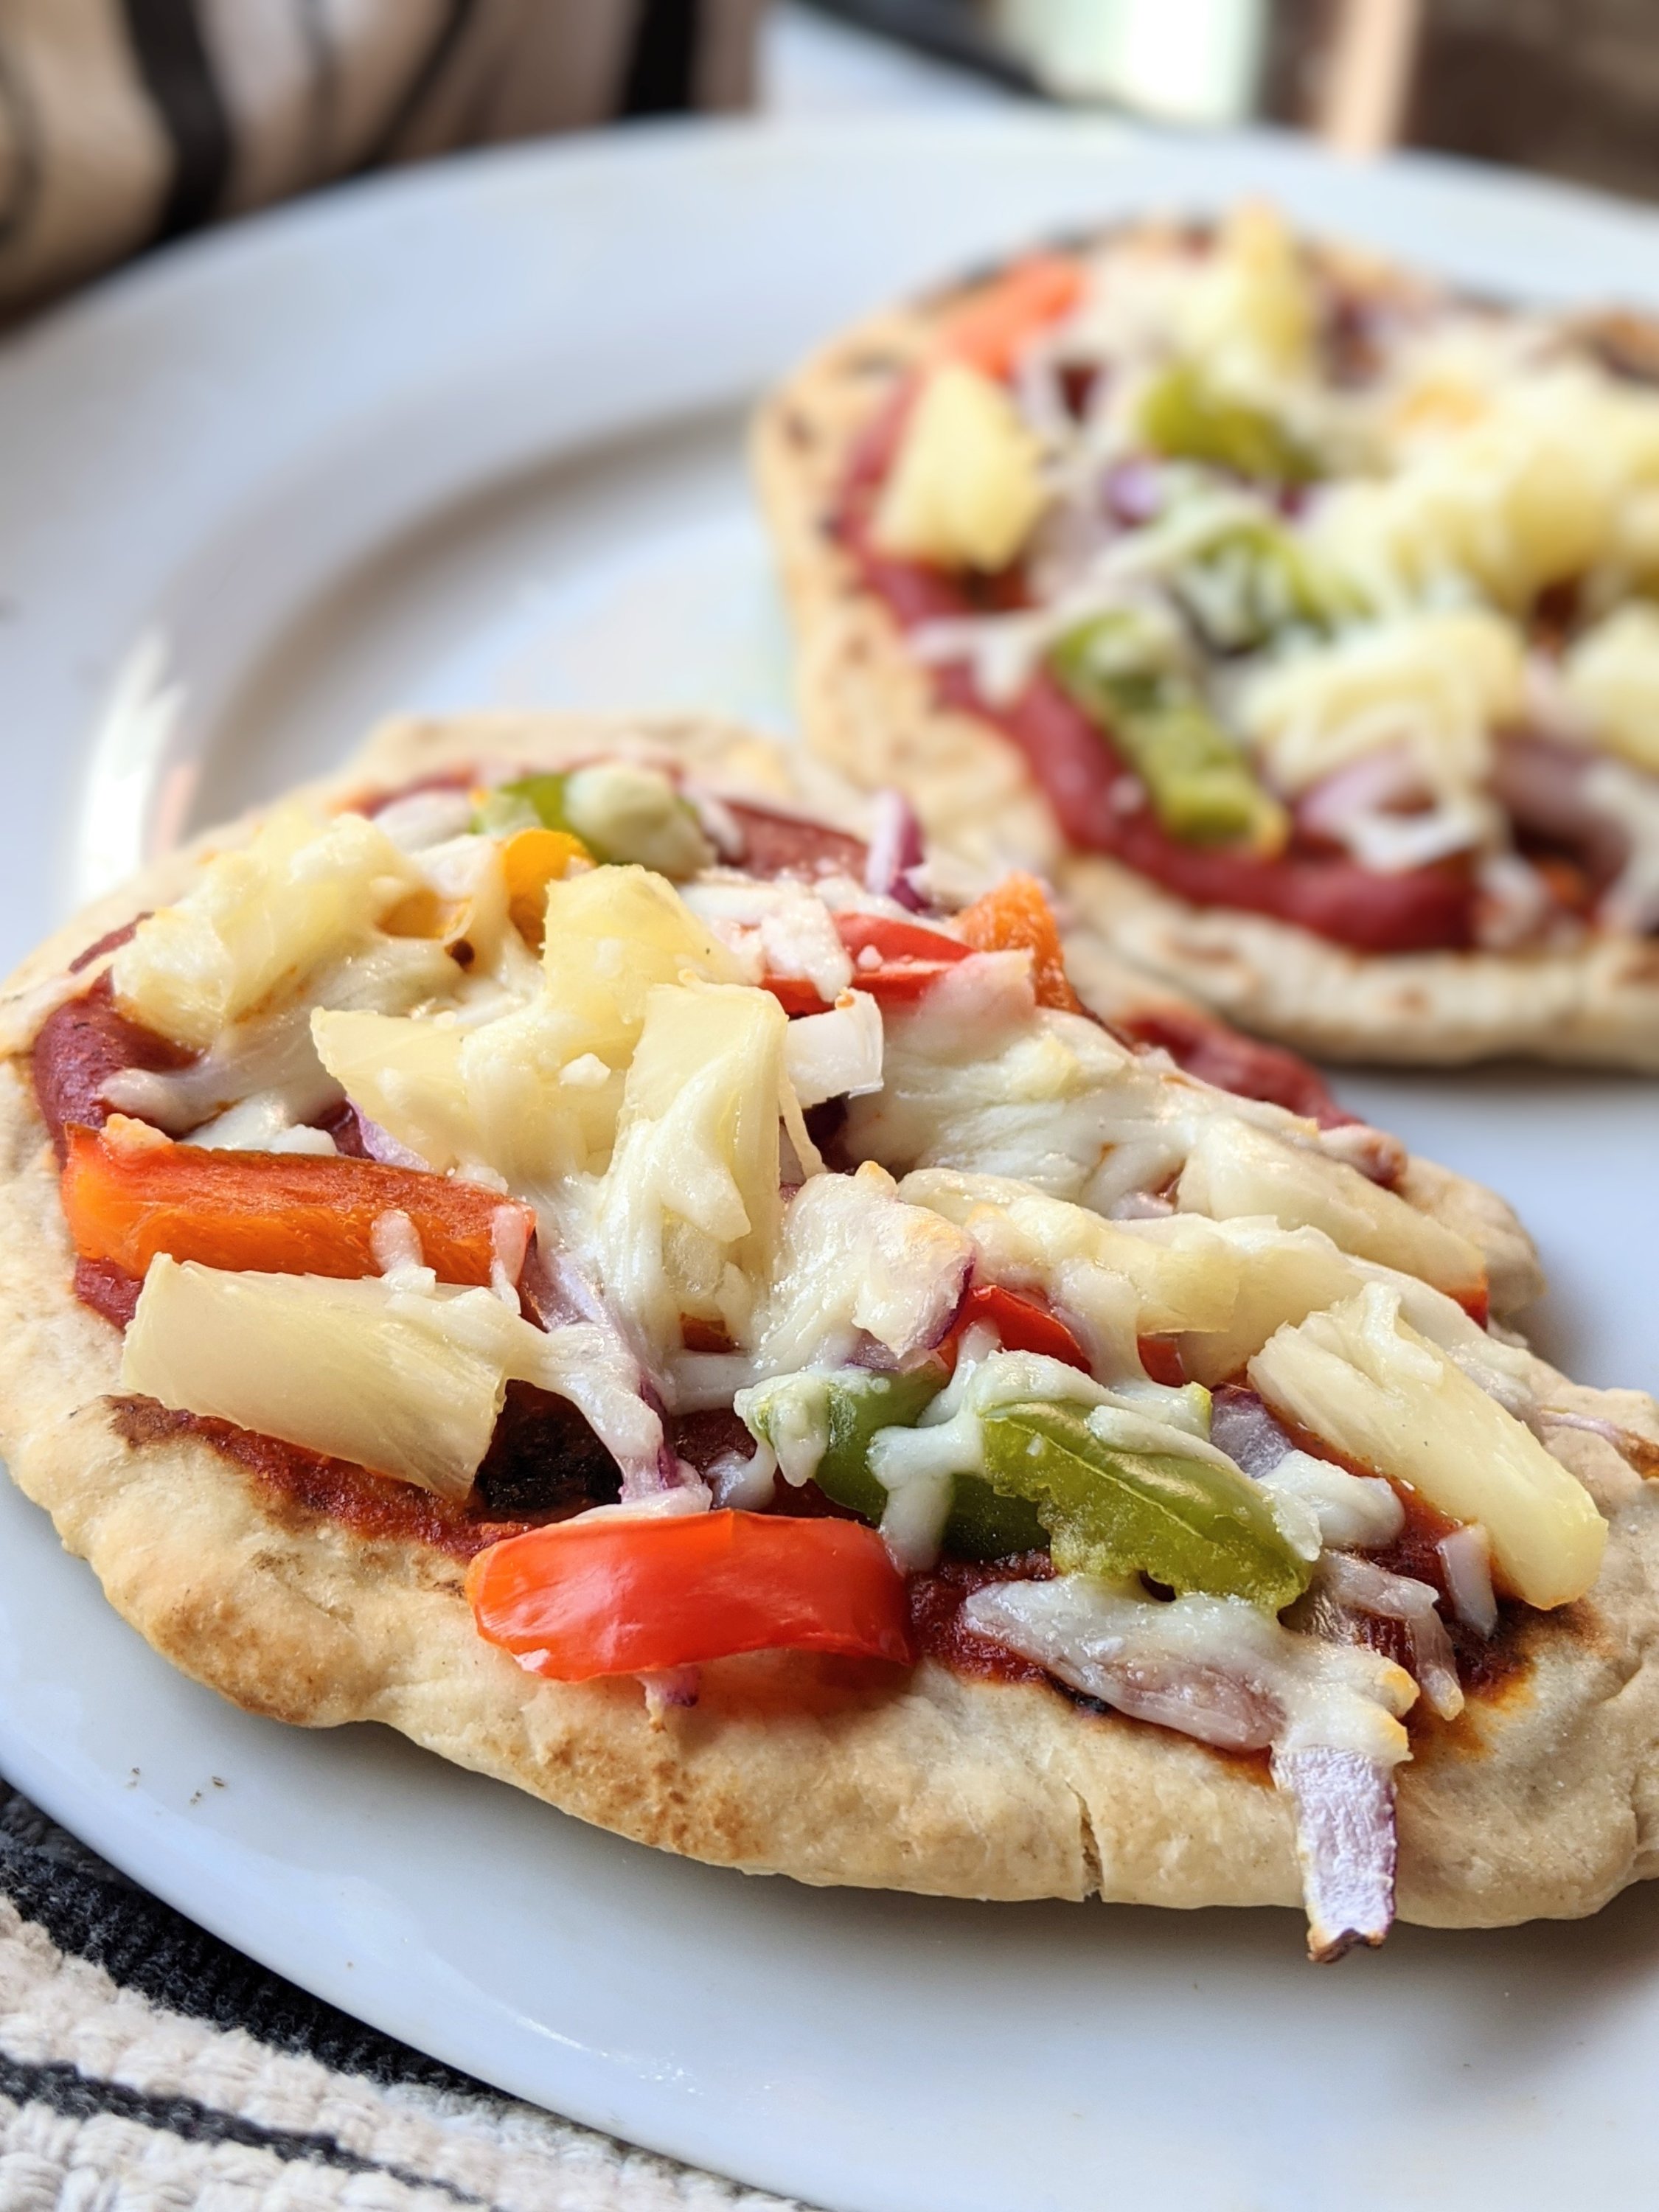 healthy naan pizza with veggie toppings family friendly dinners or lunches easy meals for kids pizza with flatbread crust recipe